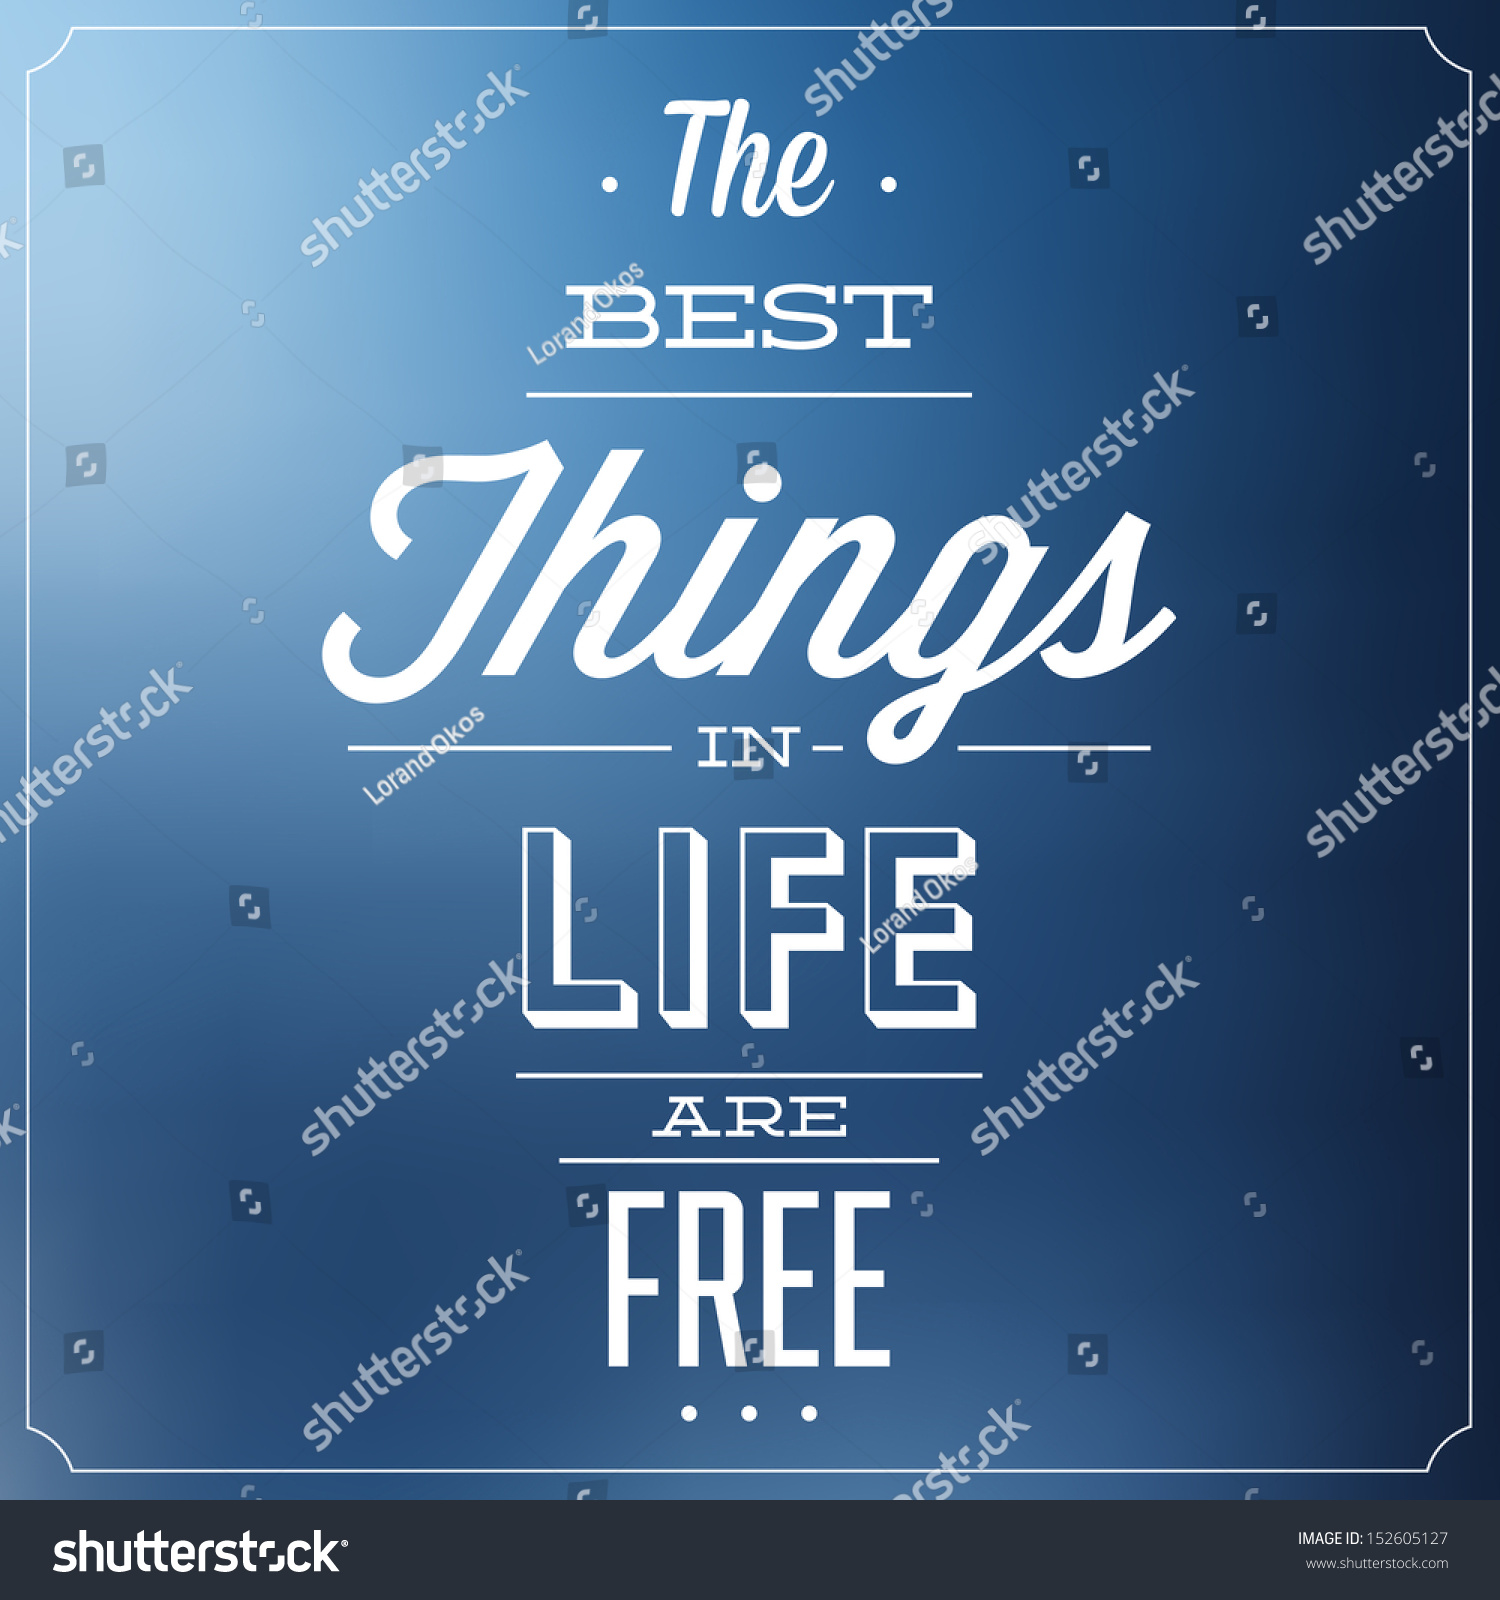 The Best Things In Life Are Free Quote Typographic Background Design